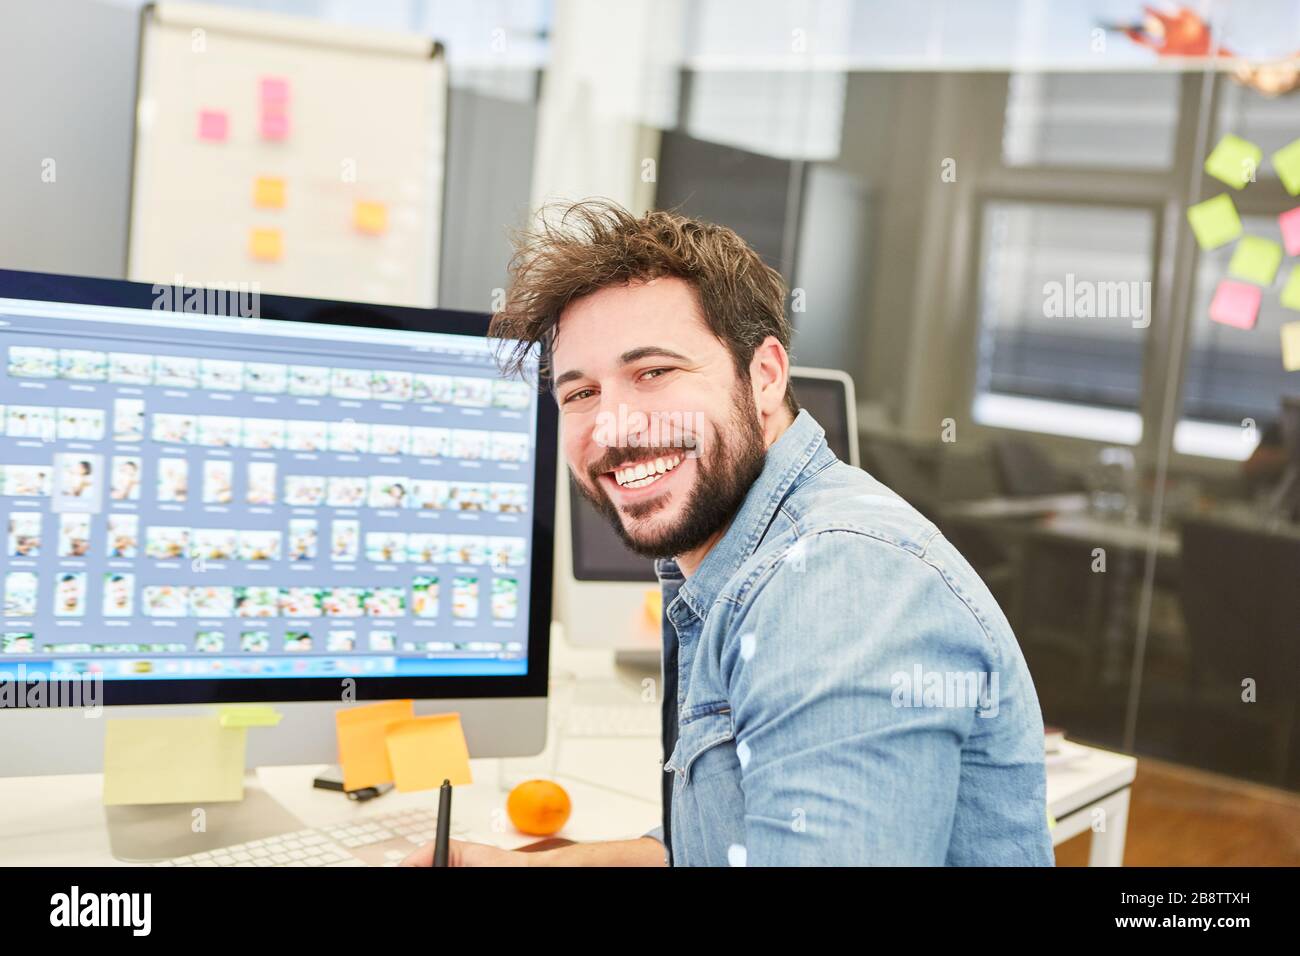 Graphic designer smiling on PC while designing a website in the design agency Stock Photo